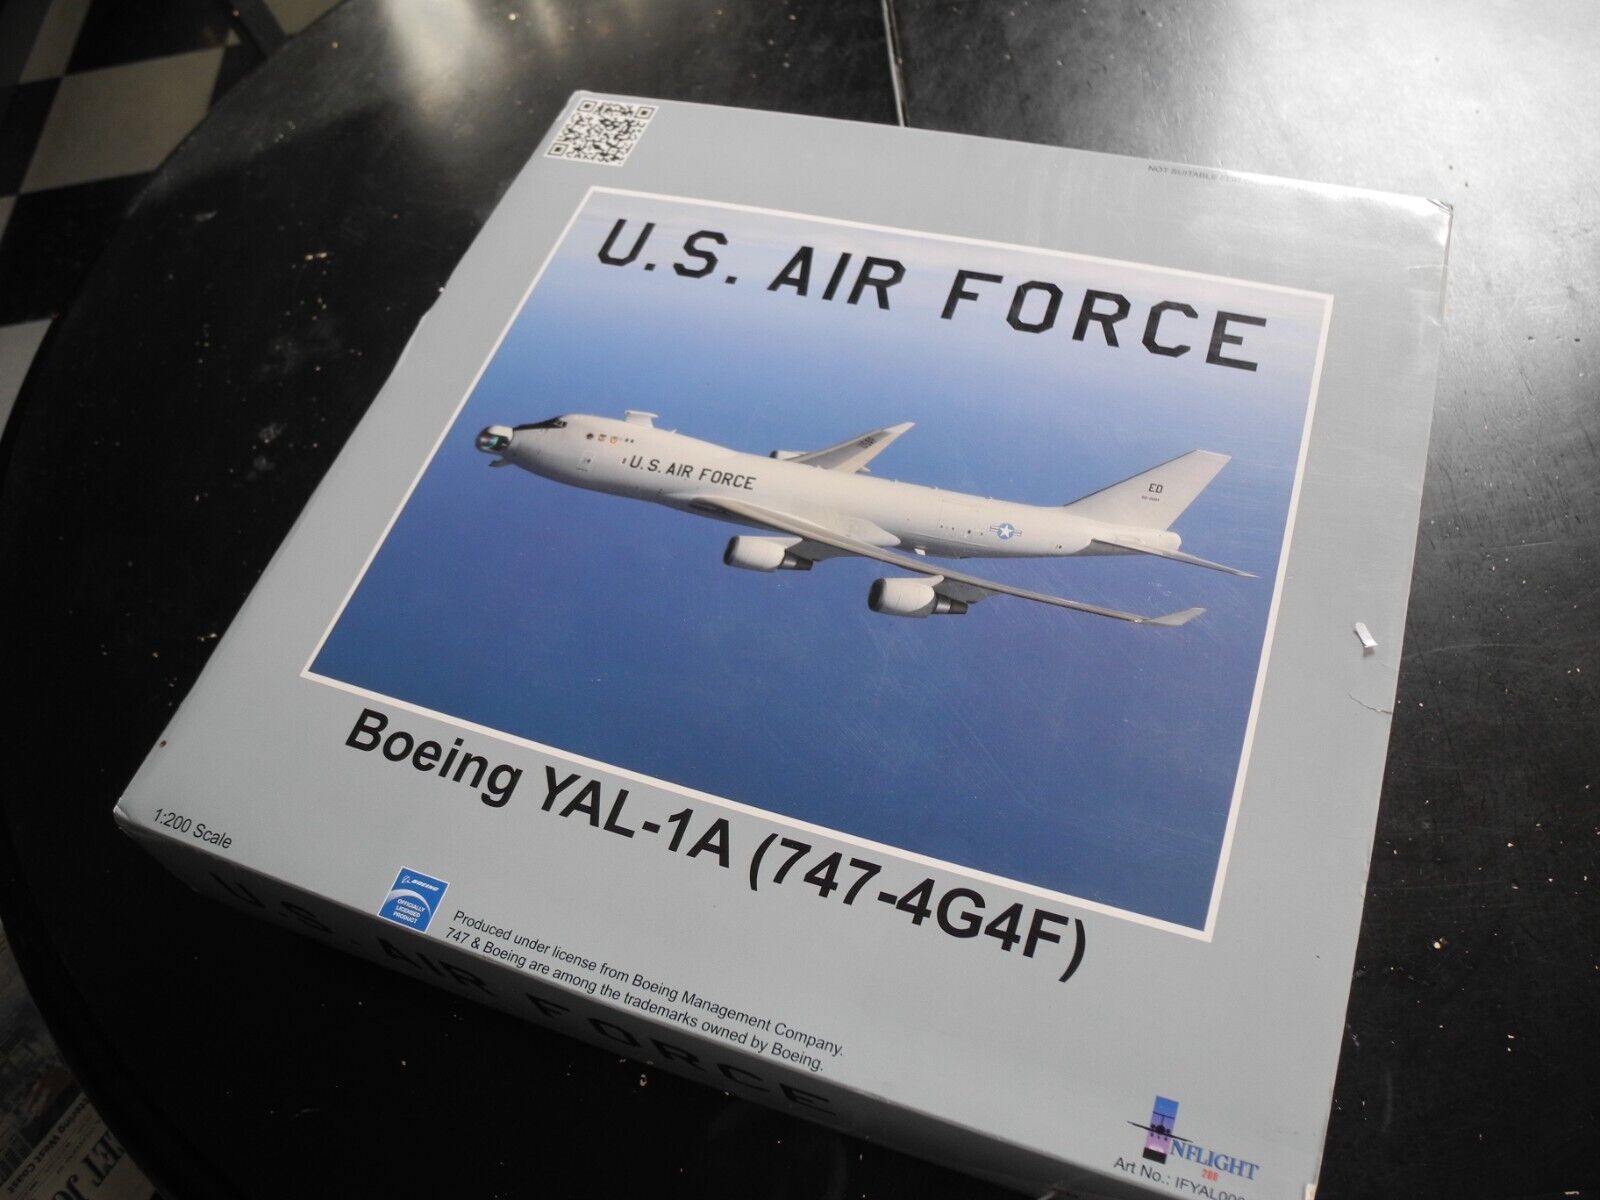 Super RARE Inflight 200 US AIR FORCE Boeing 747-4G4F YAL-1A, Hard to Find